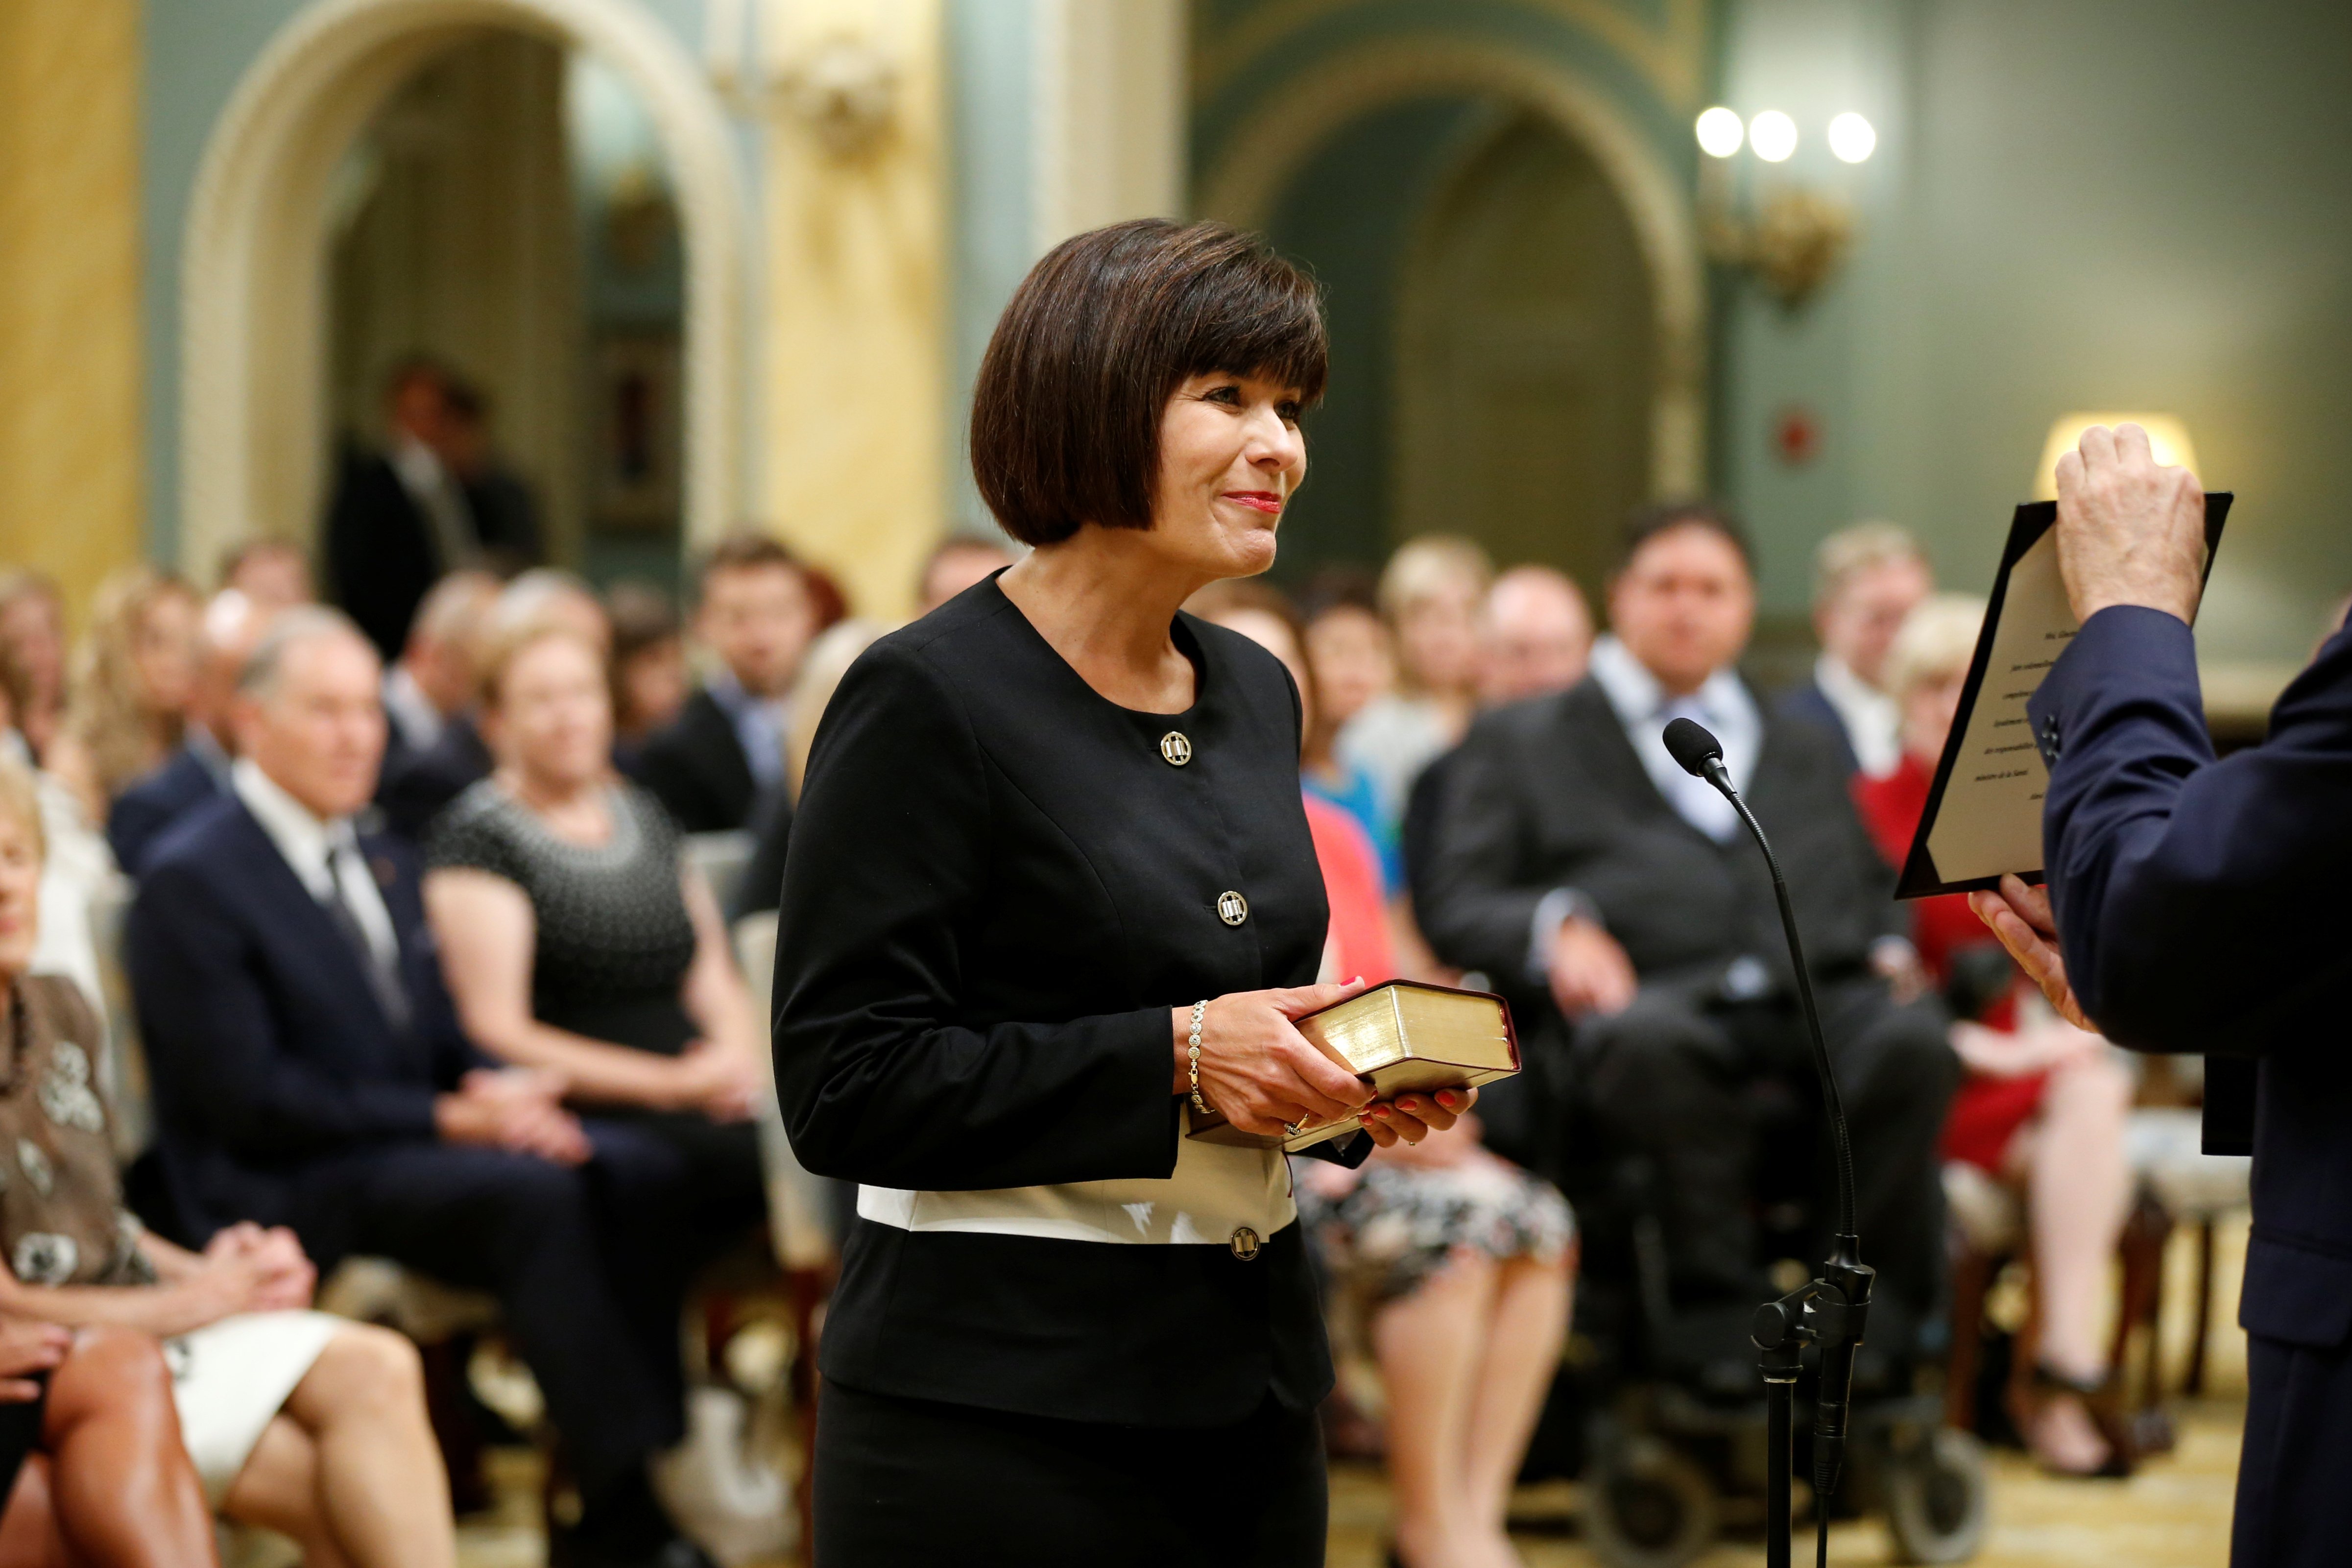 Ginette Petitpas Taylor is sworn-in as Canada's Minister of Health during a cabinet shuffle at Rideau Hall in Ottawa, Ontario, Canada, Aug. 28, 2017. REUTERS/Chris Wattie 